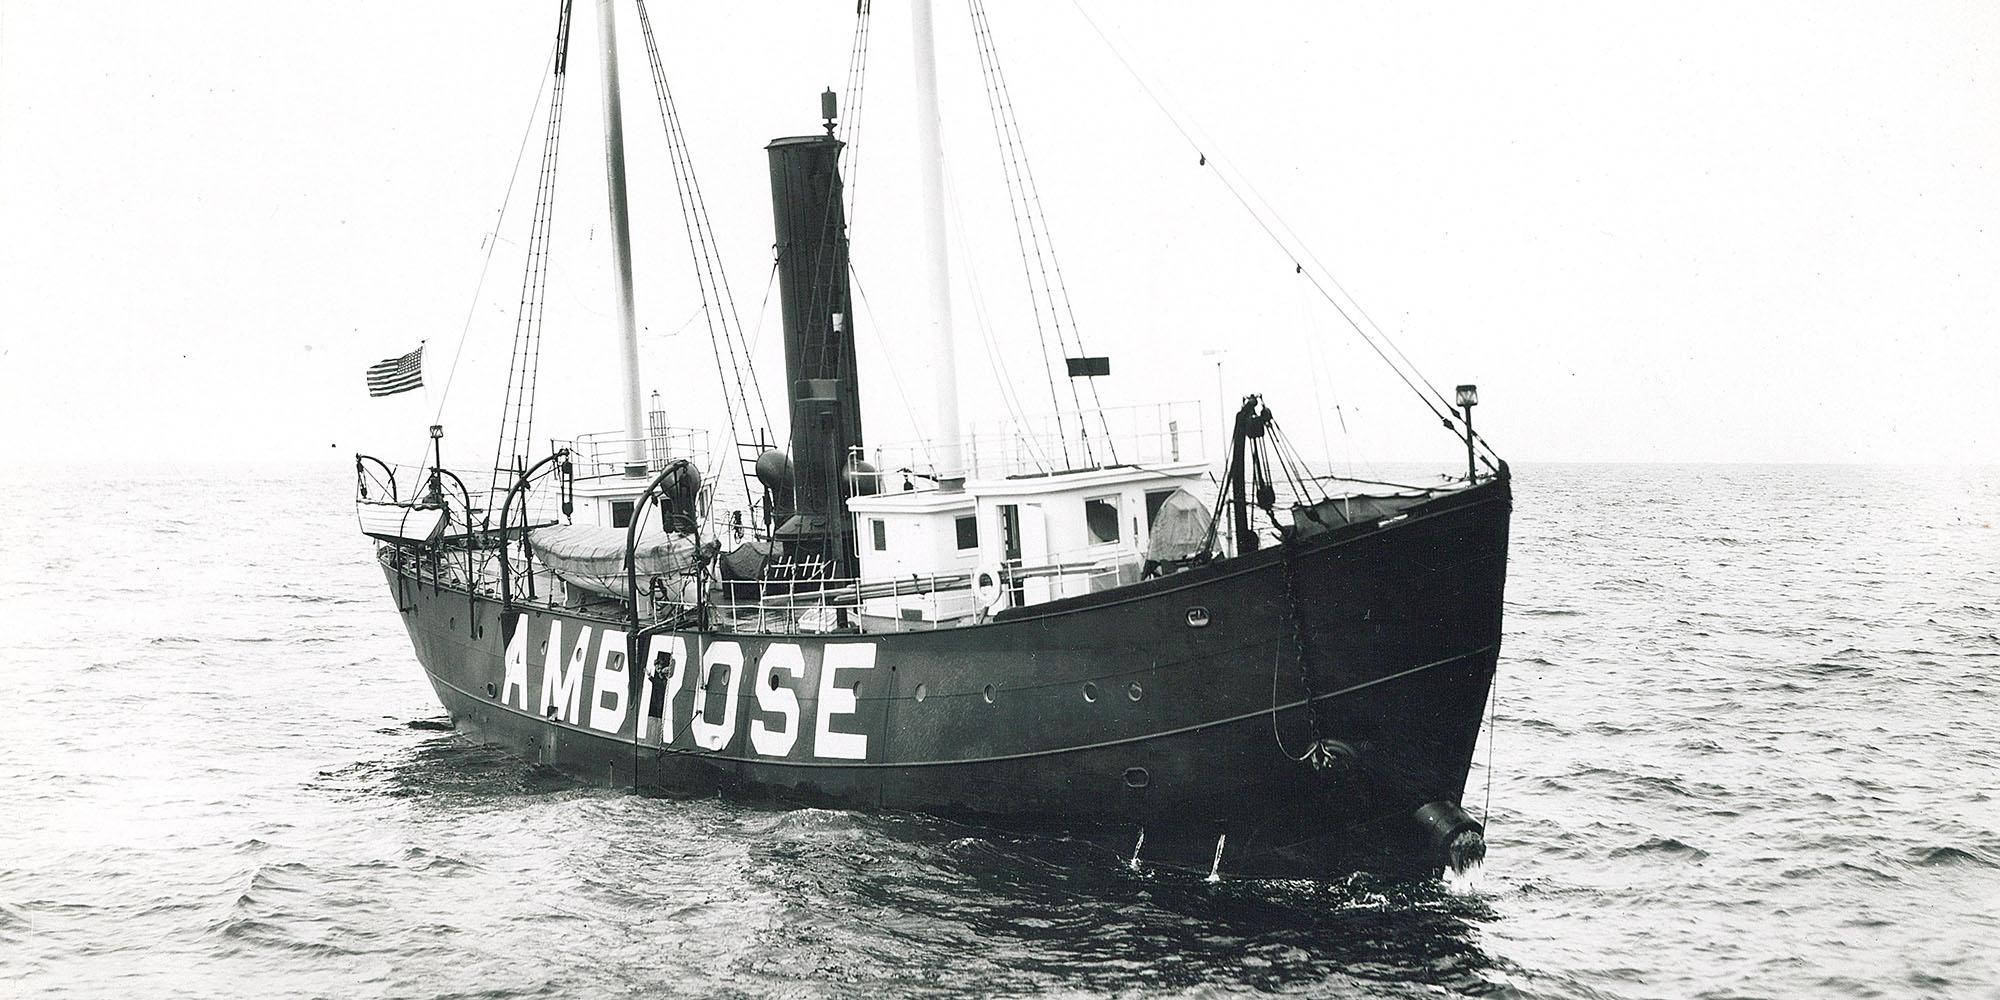 About the 1908 Lightship Ambrose